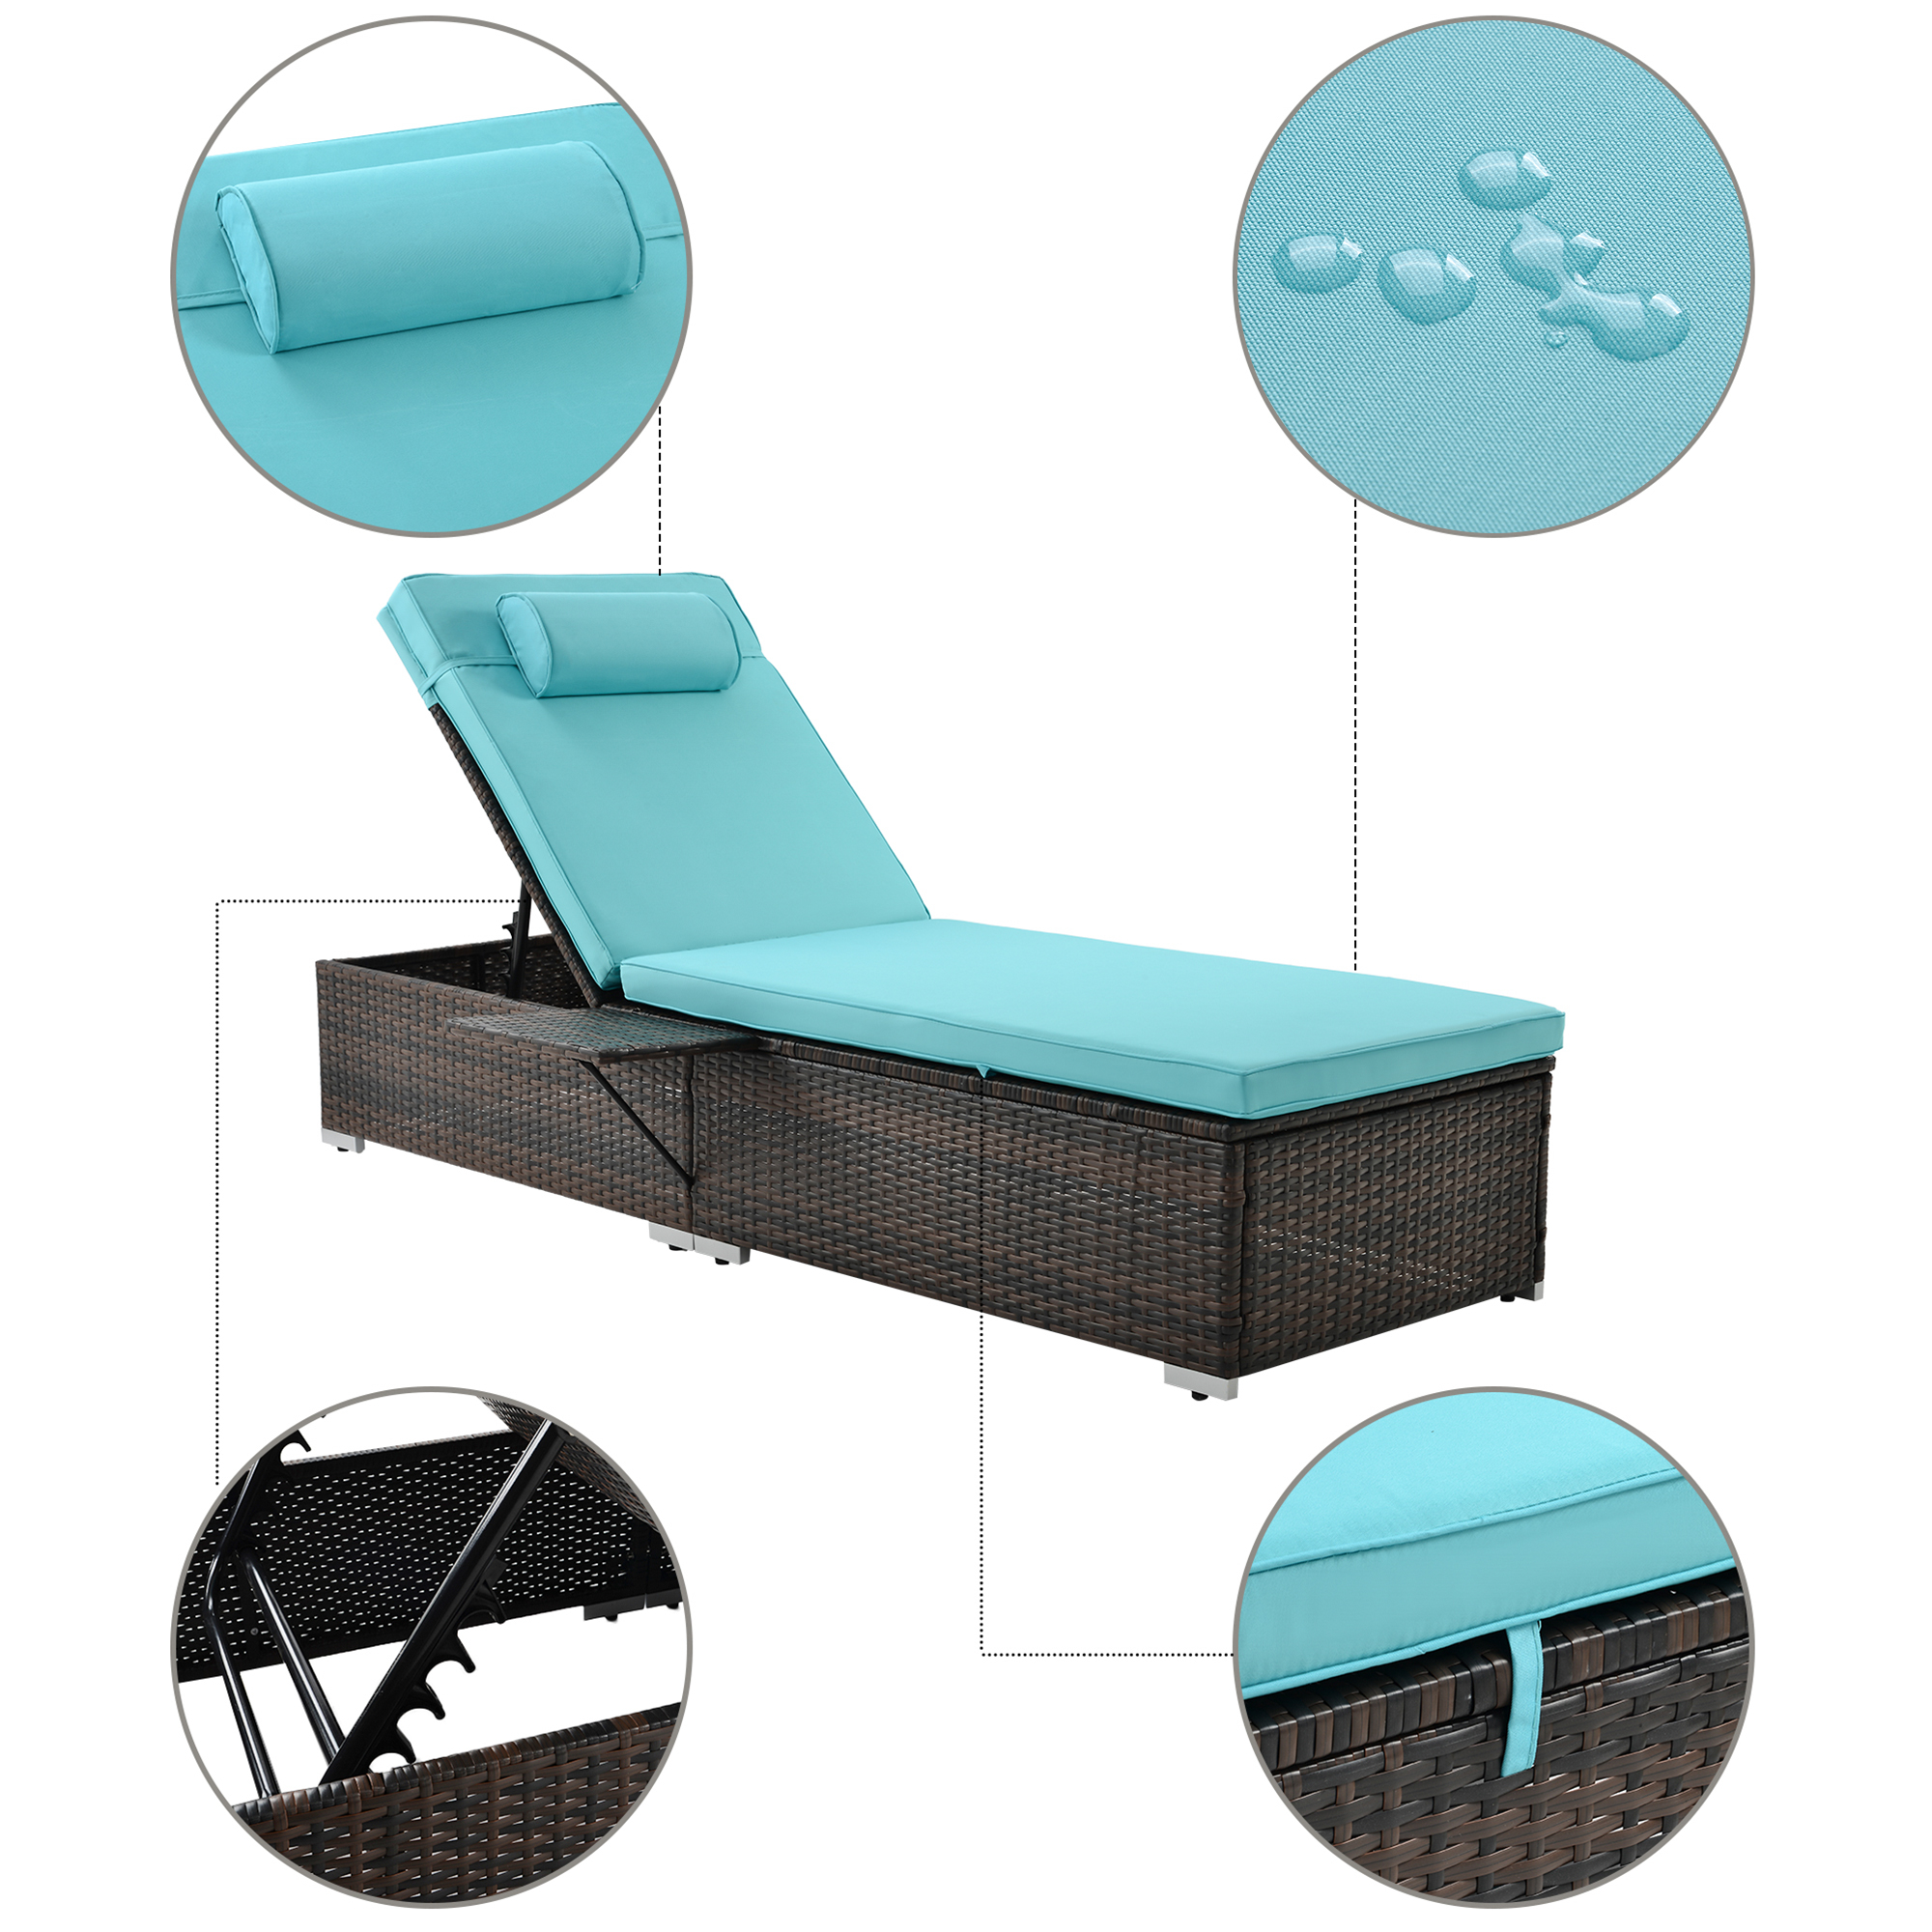 Outdoor Chaise Lounge Chairs, Patio Reclining Sun Lounger, Wicker Rattan Adjustable Lounge Chair with Side Table, Comfort Head Pillow, Reclining Chair for Poolside, Deck, Backyard, 2 Pack, Blue - image 3 of 10